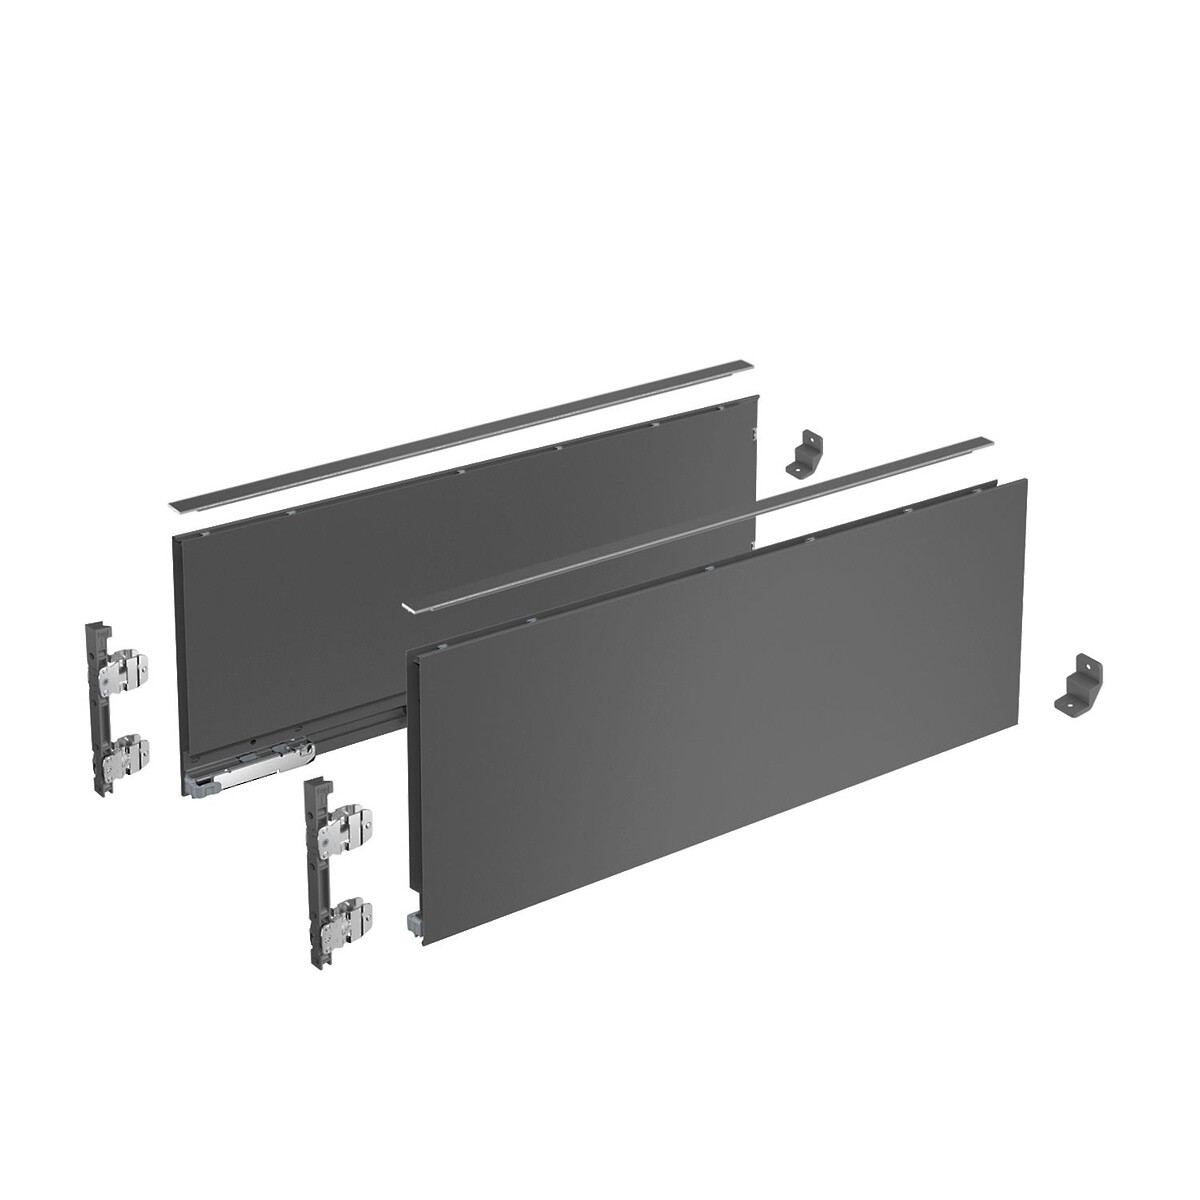 AvanTech YOU Drawer side profile set, height 187 mm x NL 300 mm, Anthracite, Left and Right